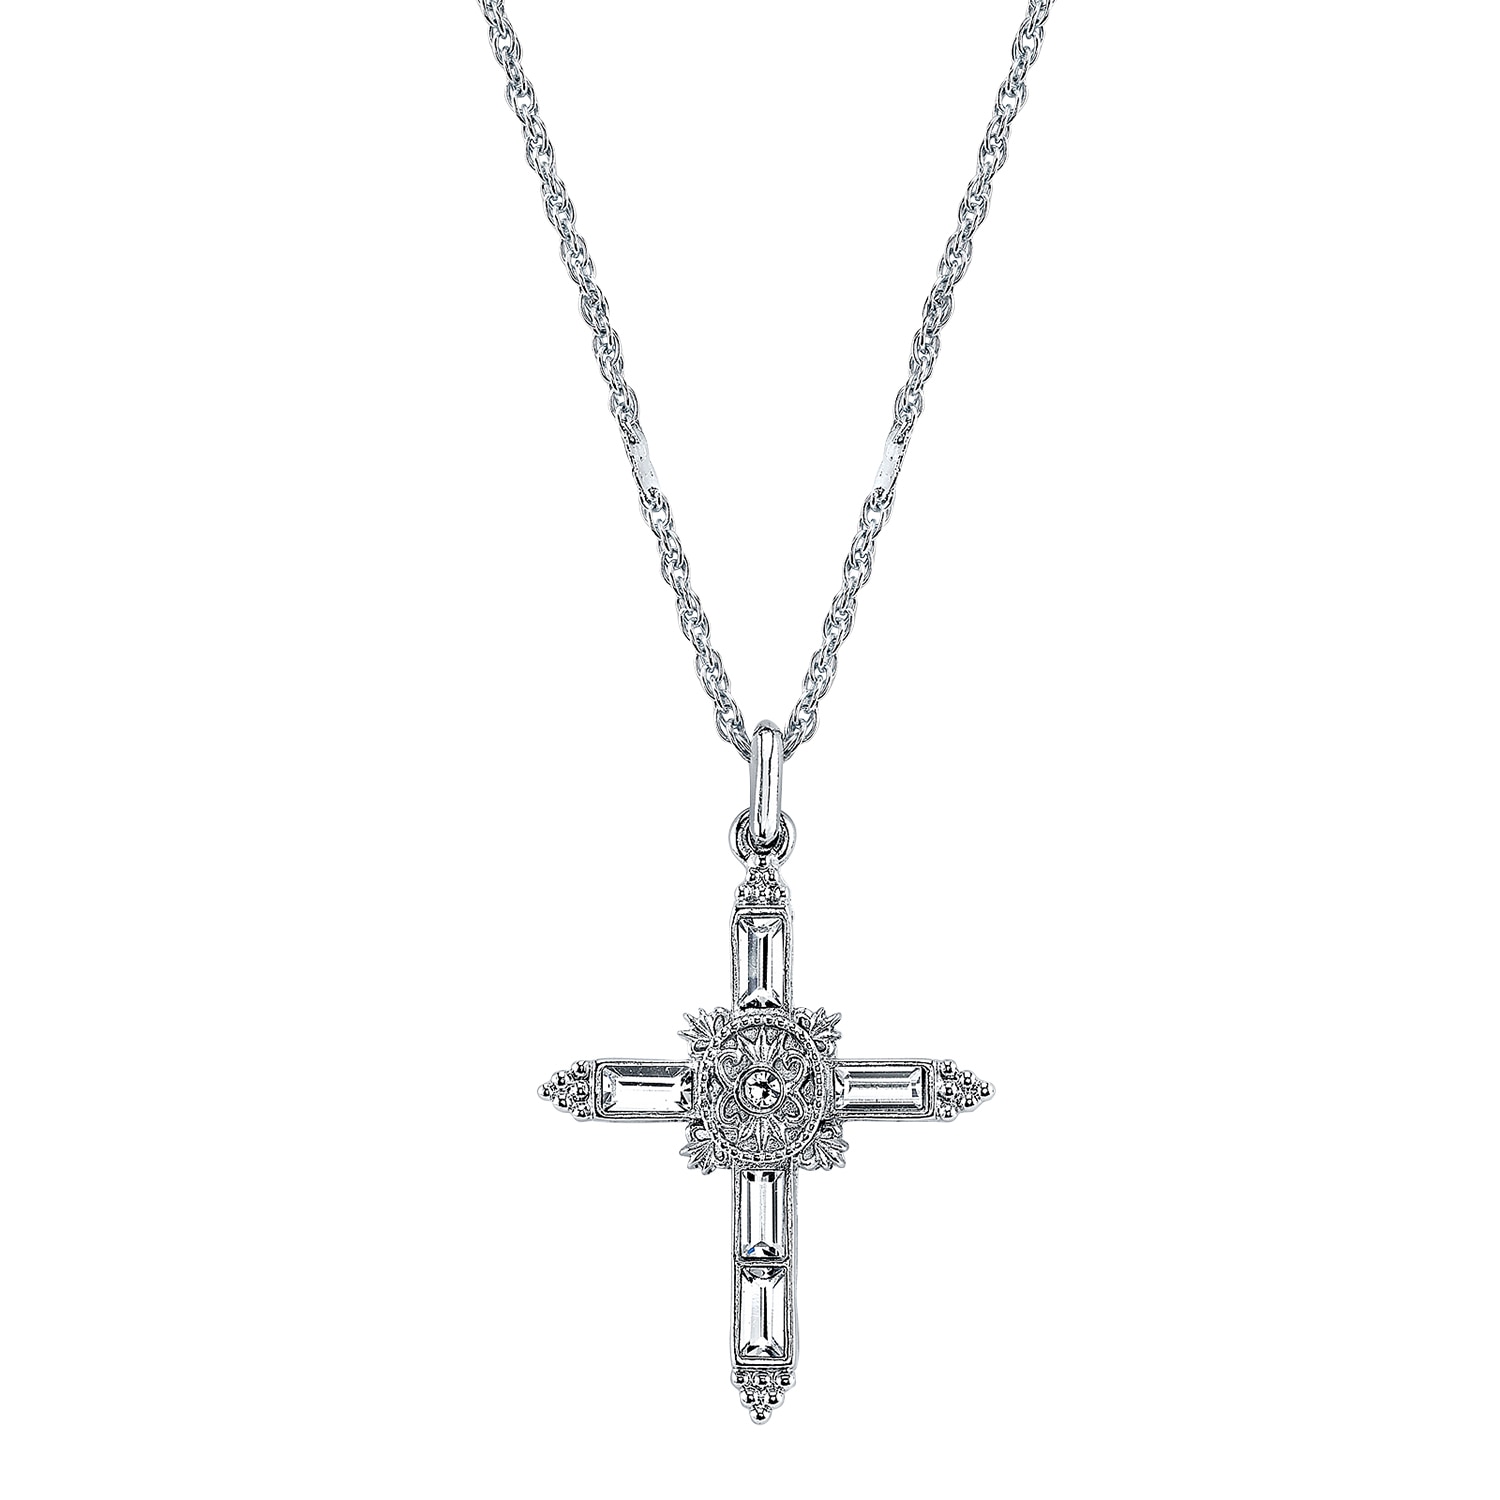 1928 Symbols of Faith silver tone crystal baguette cross necklace 18 inch chain